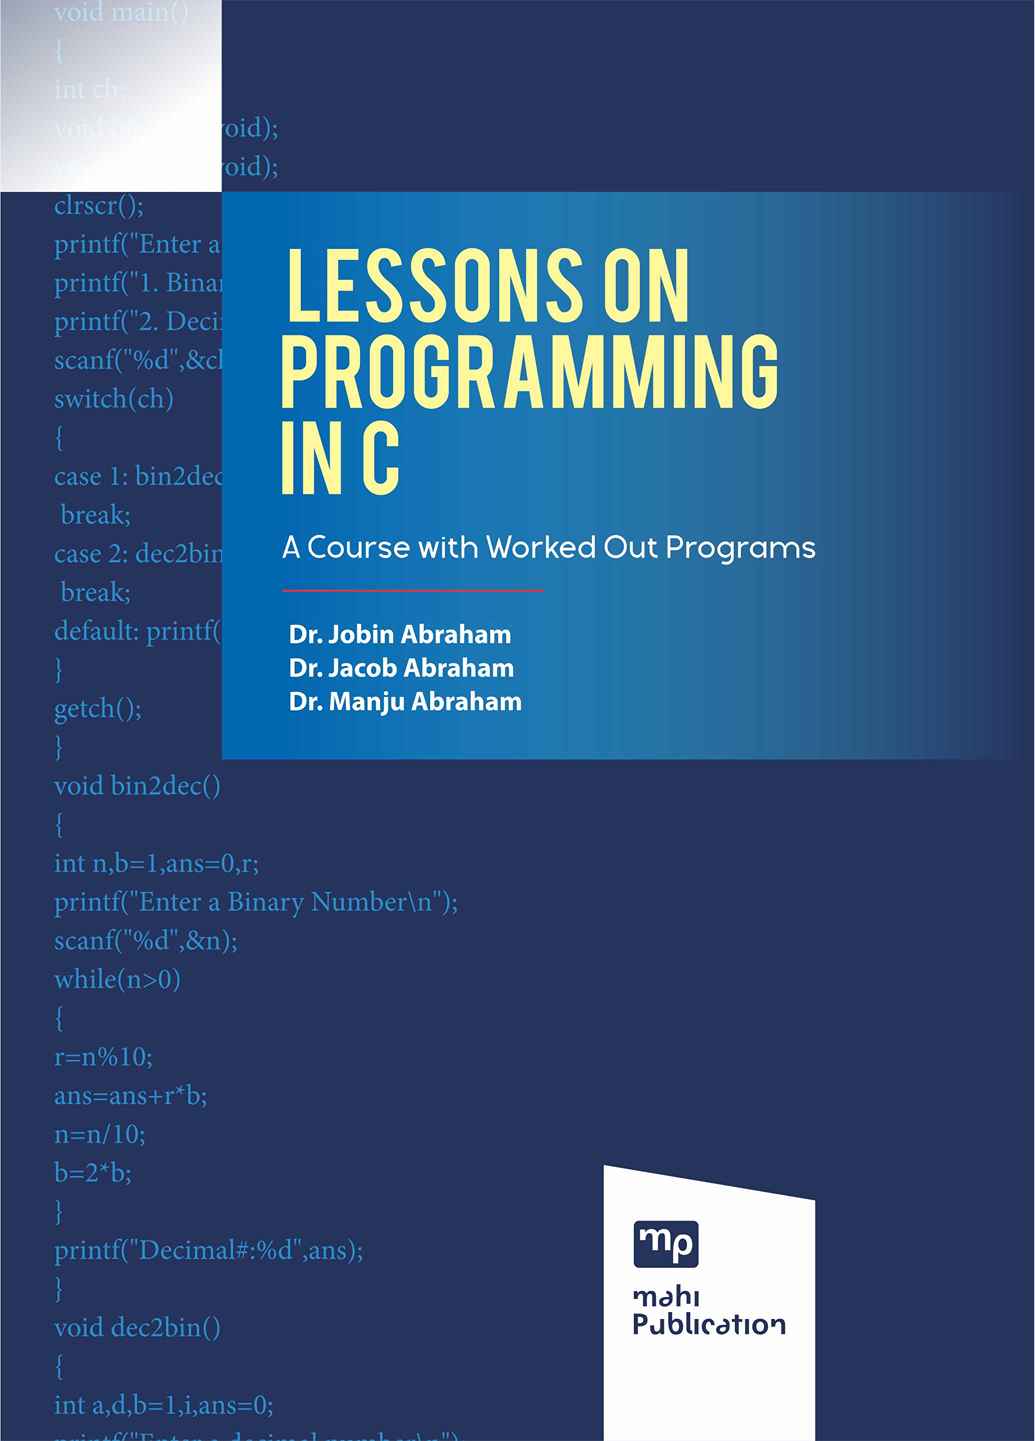 Lessons on Programming in C